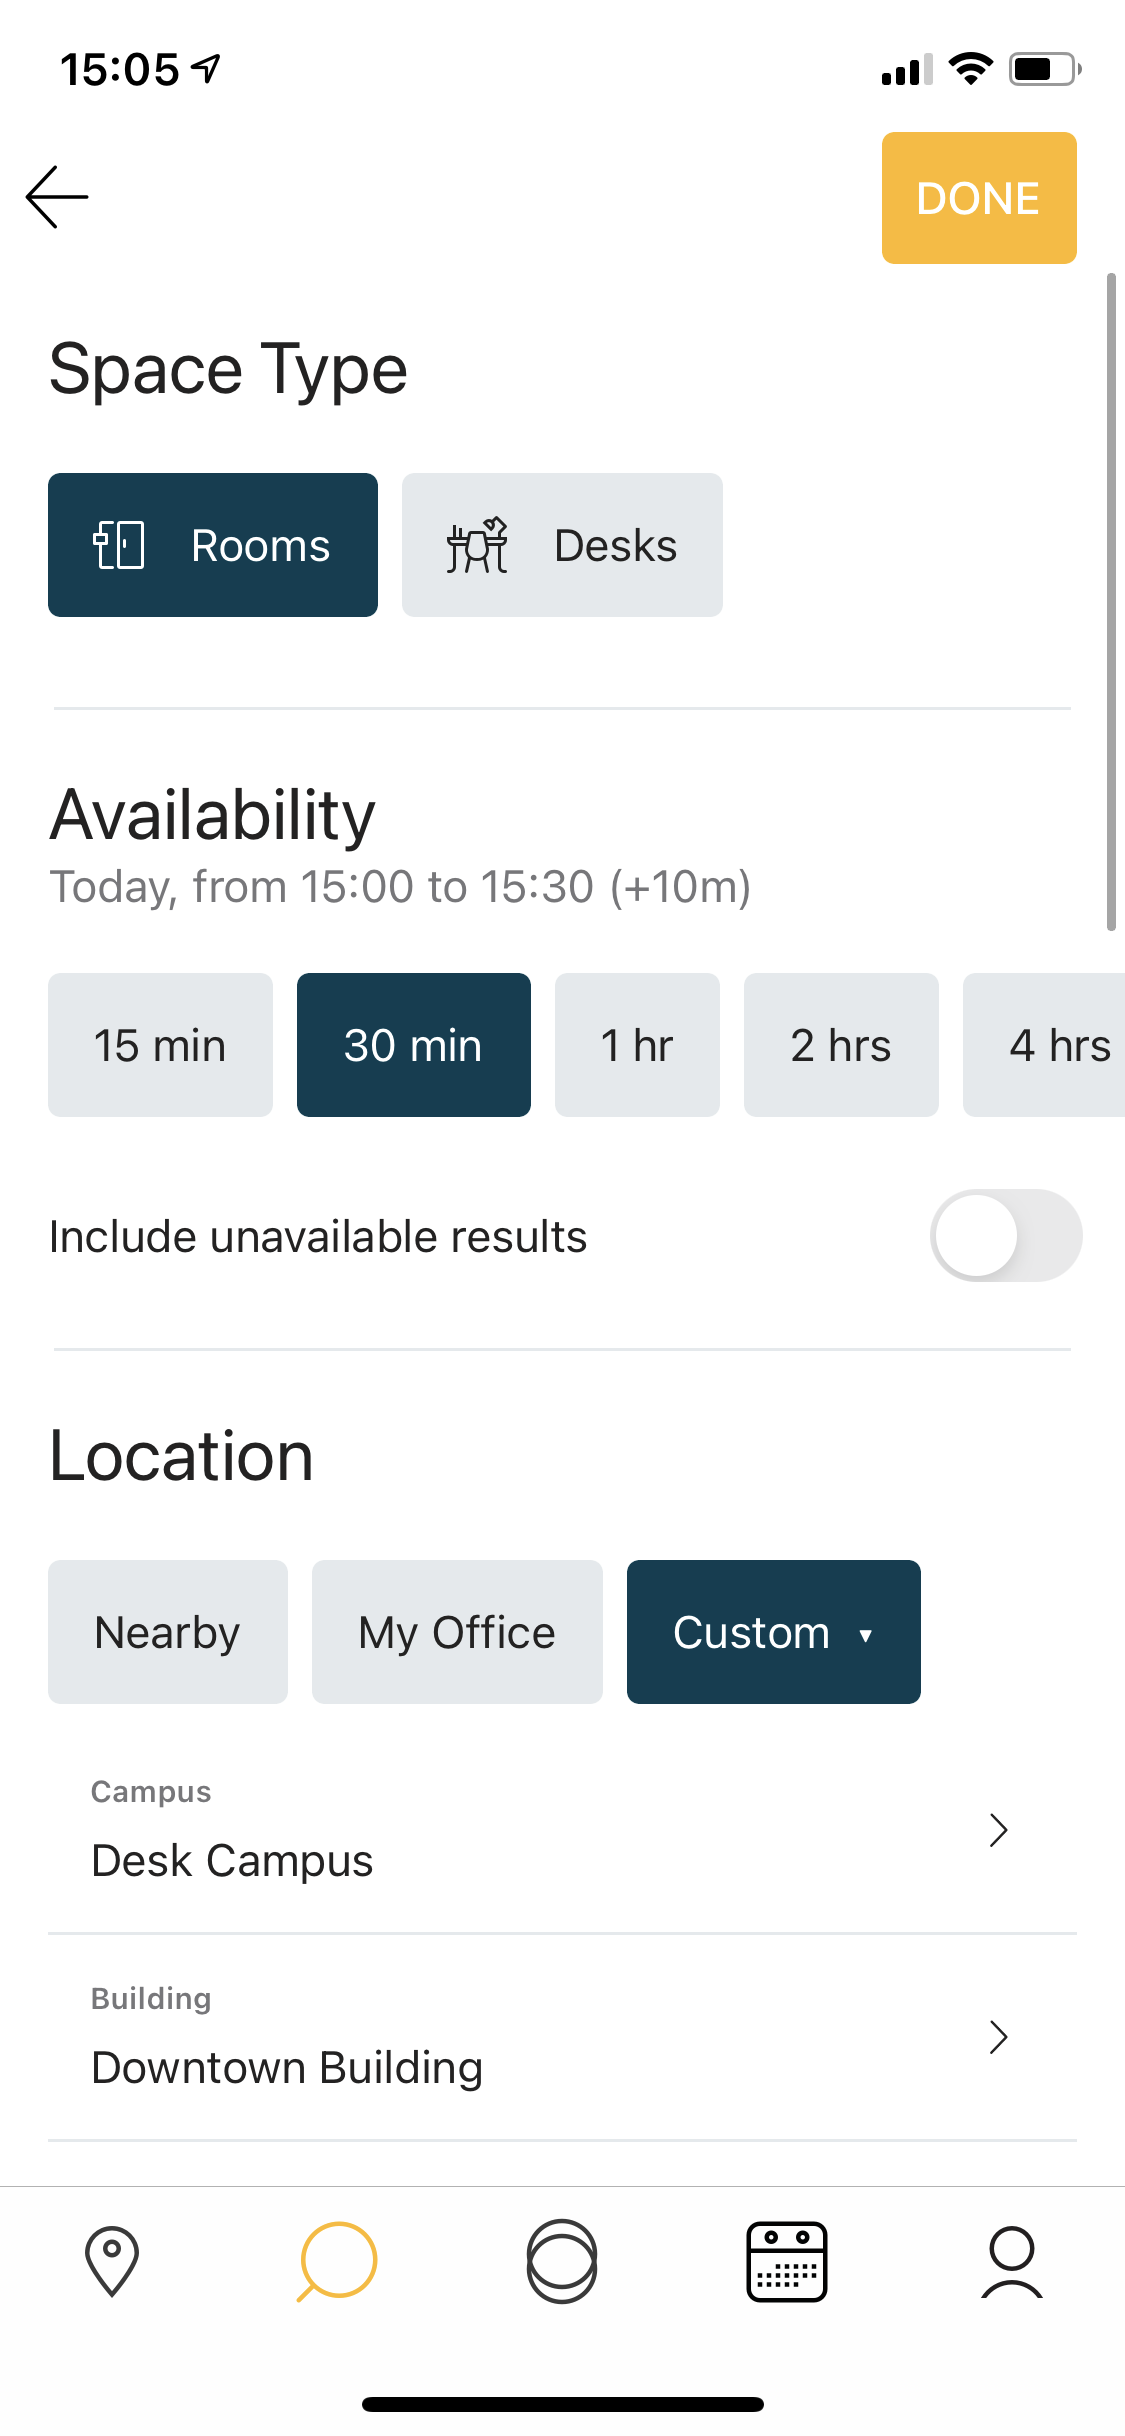 Mobile booking filters